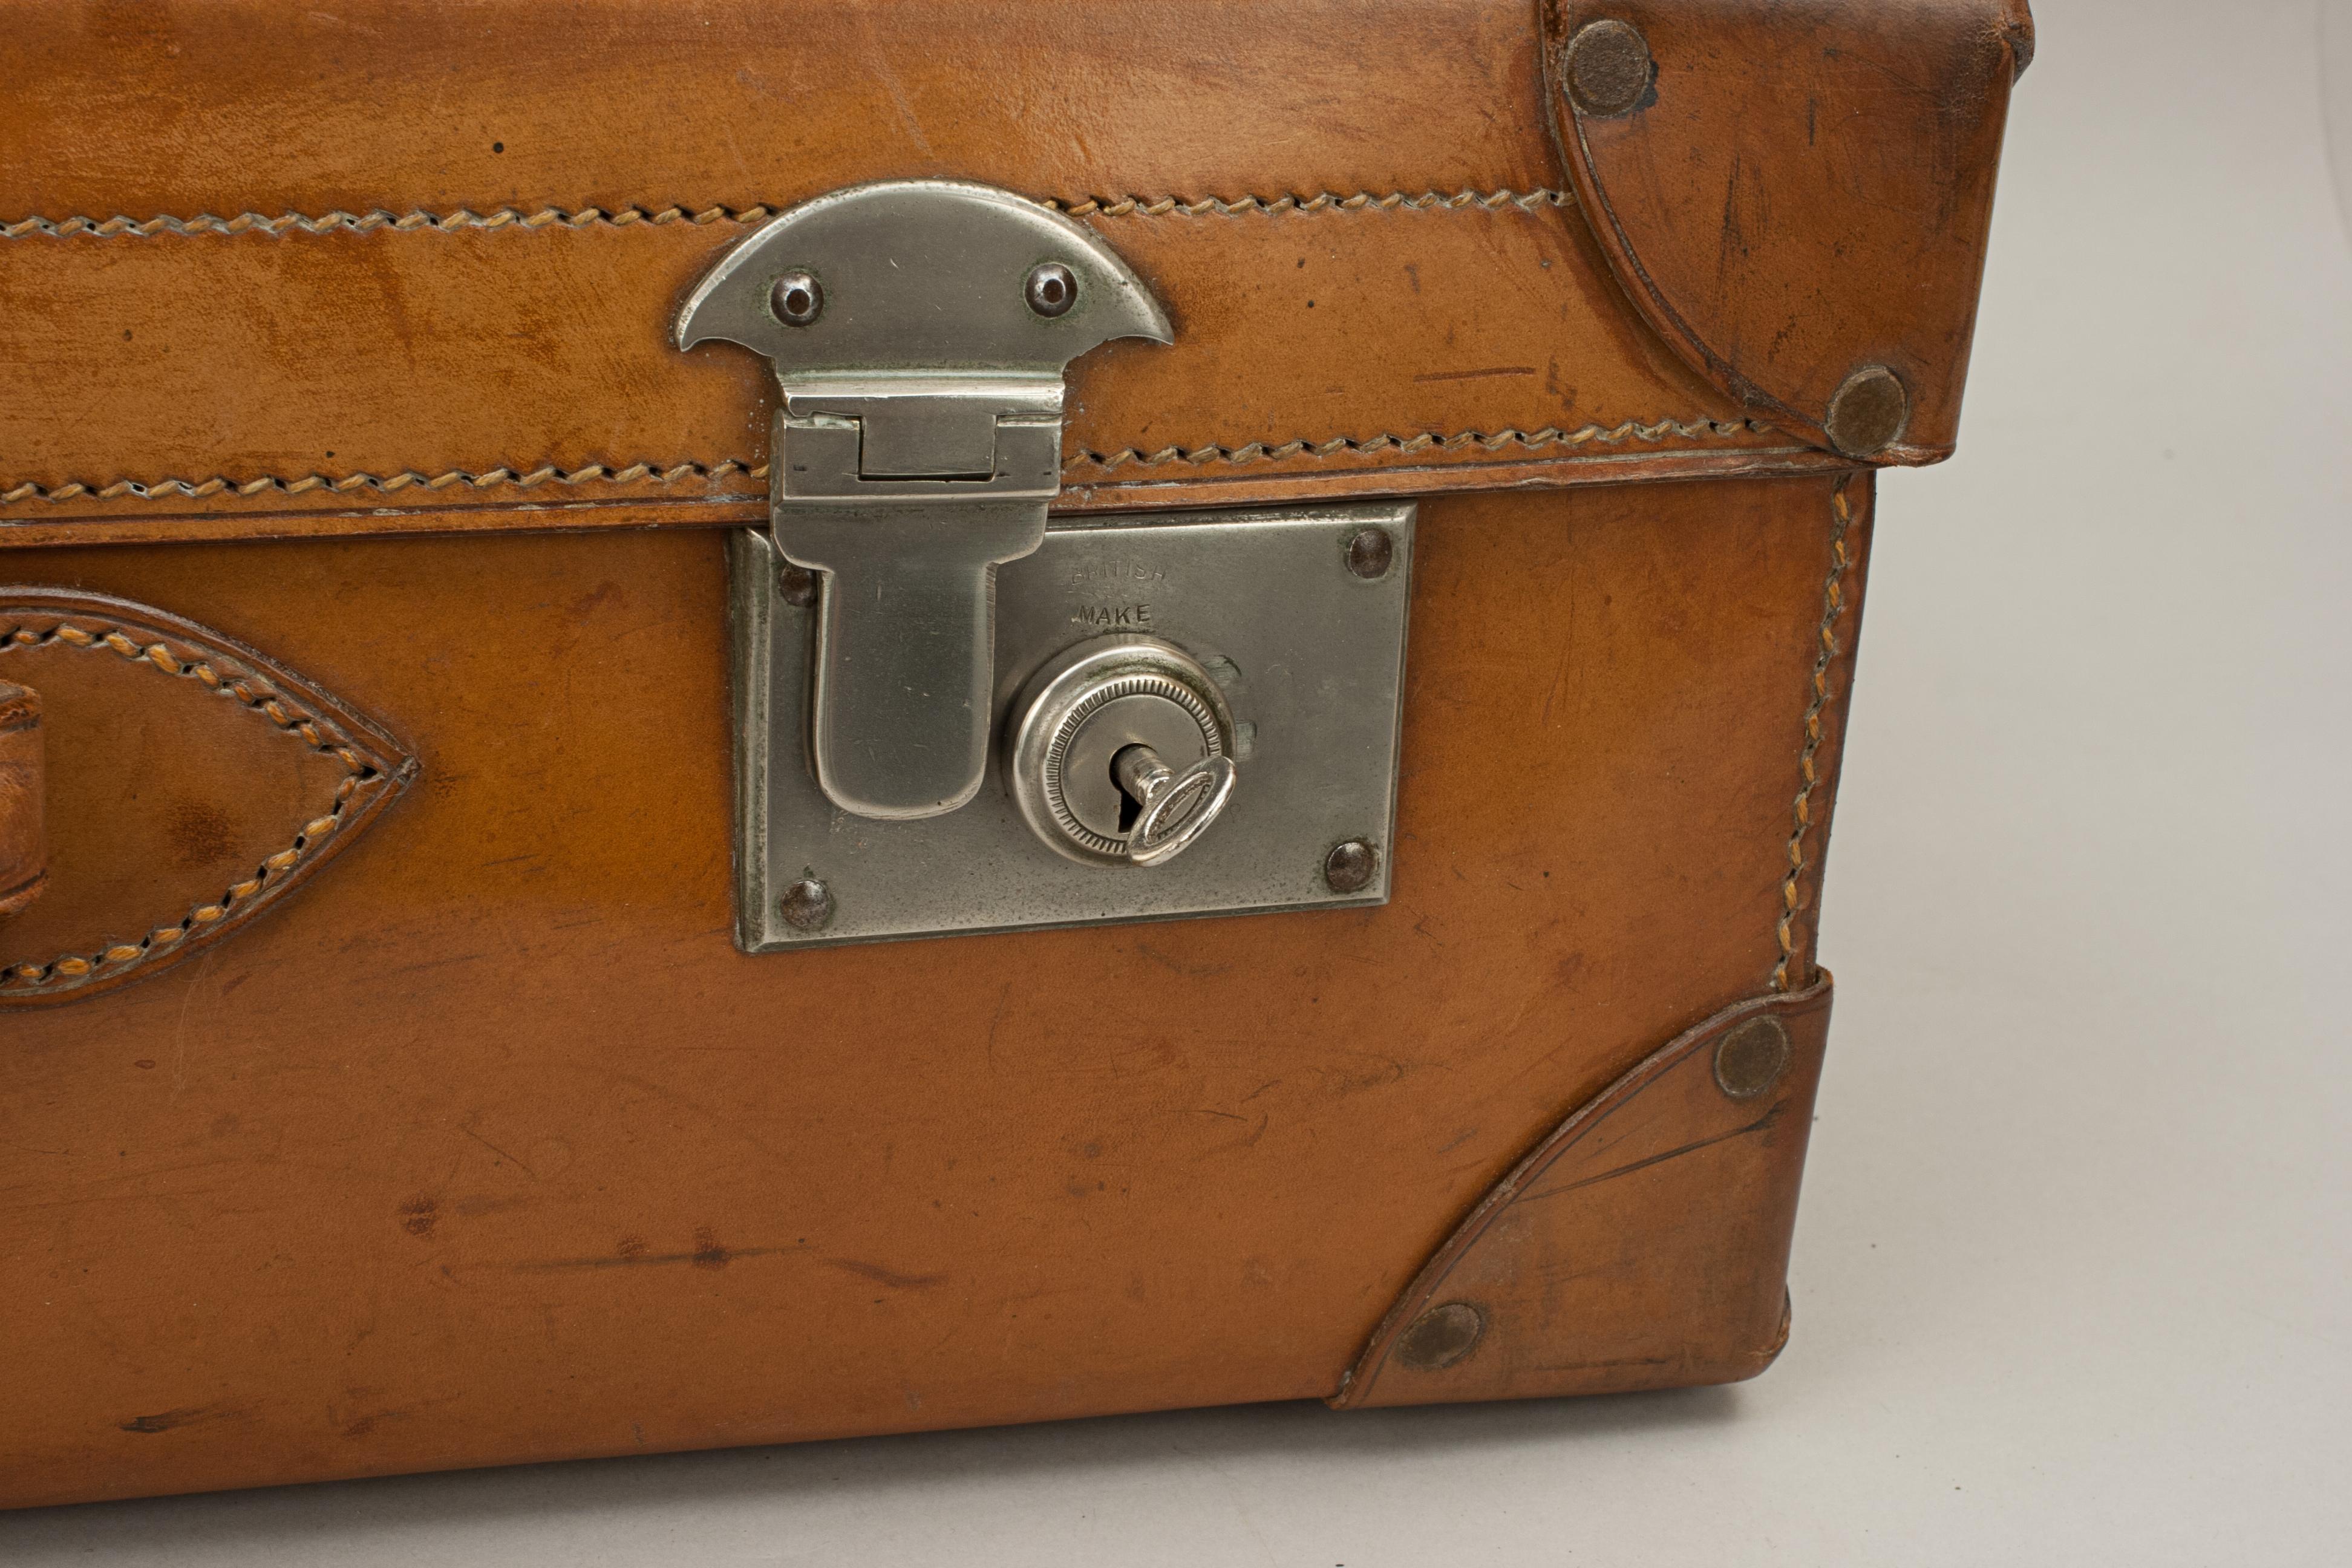 Antique Leather Suitcase, Travelling Luggage or Motoring Case 1